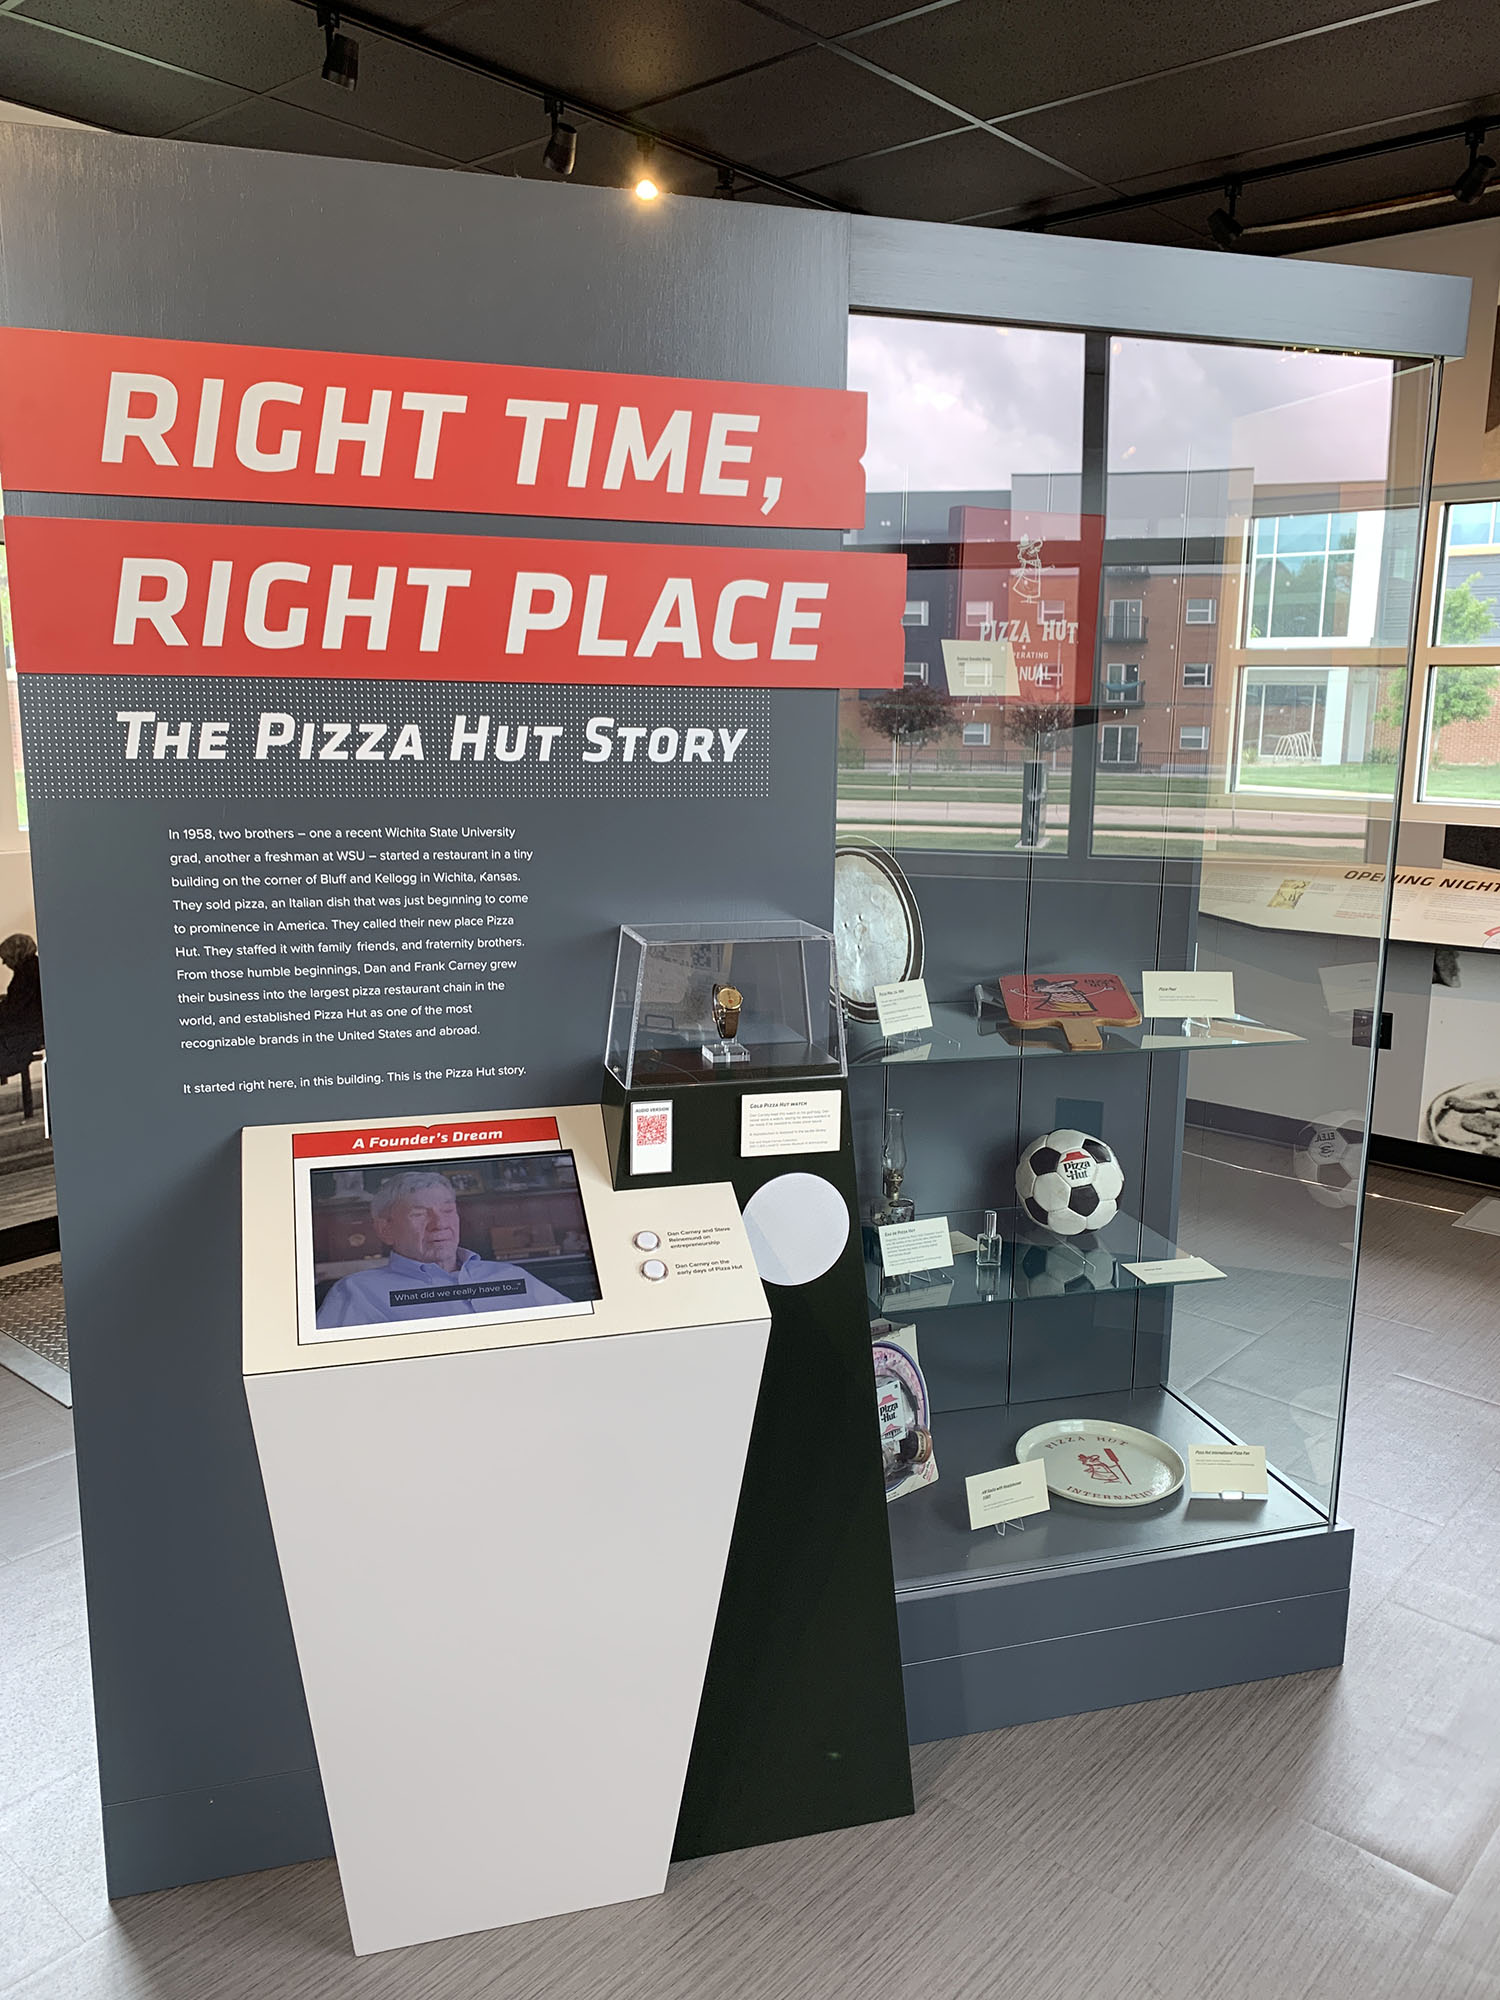 The Pizza Hut Story